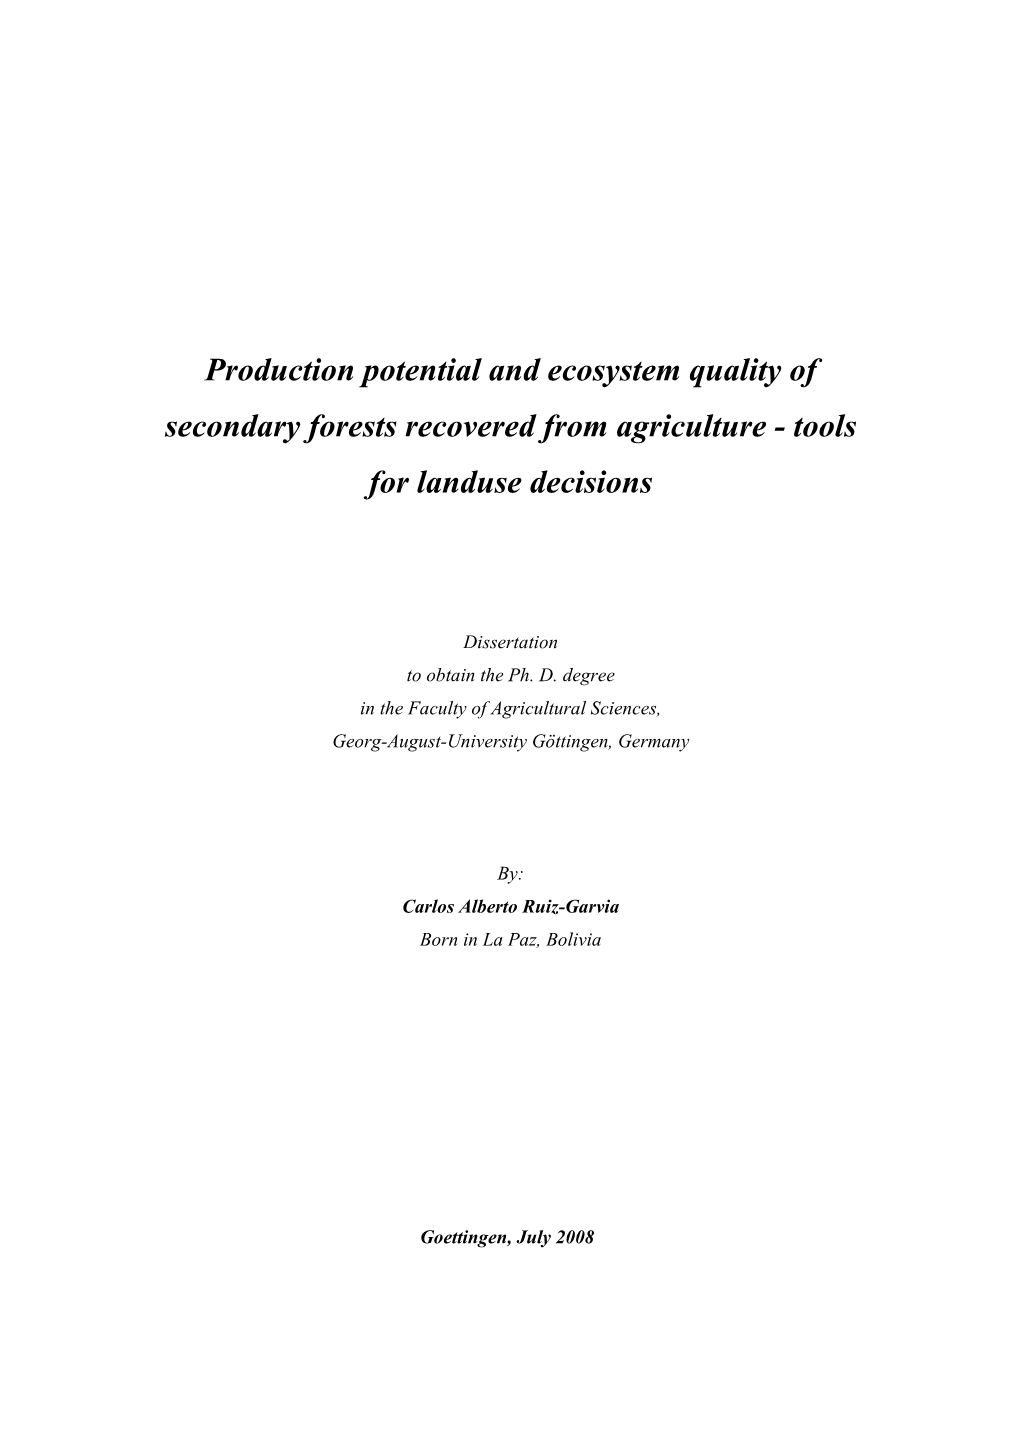 Production Potential and Ecosystem Quality of Secondary Forests Recovered from Agriculture - Tools for Landuse Decisions